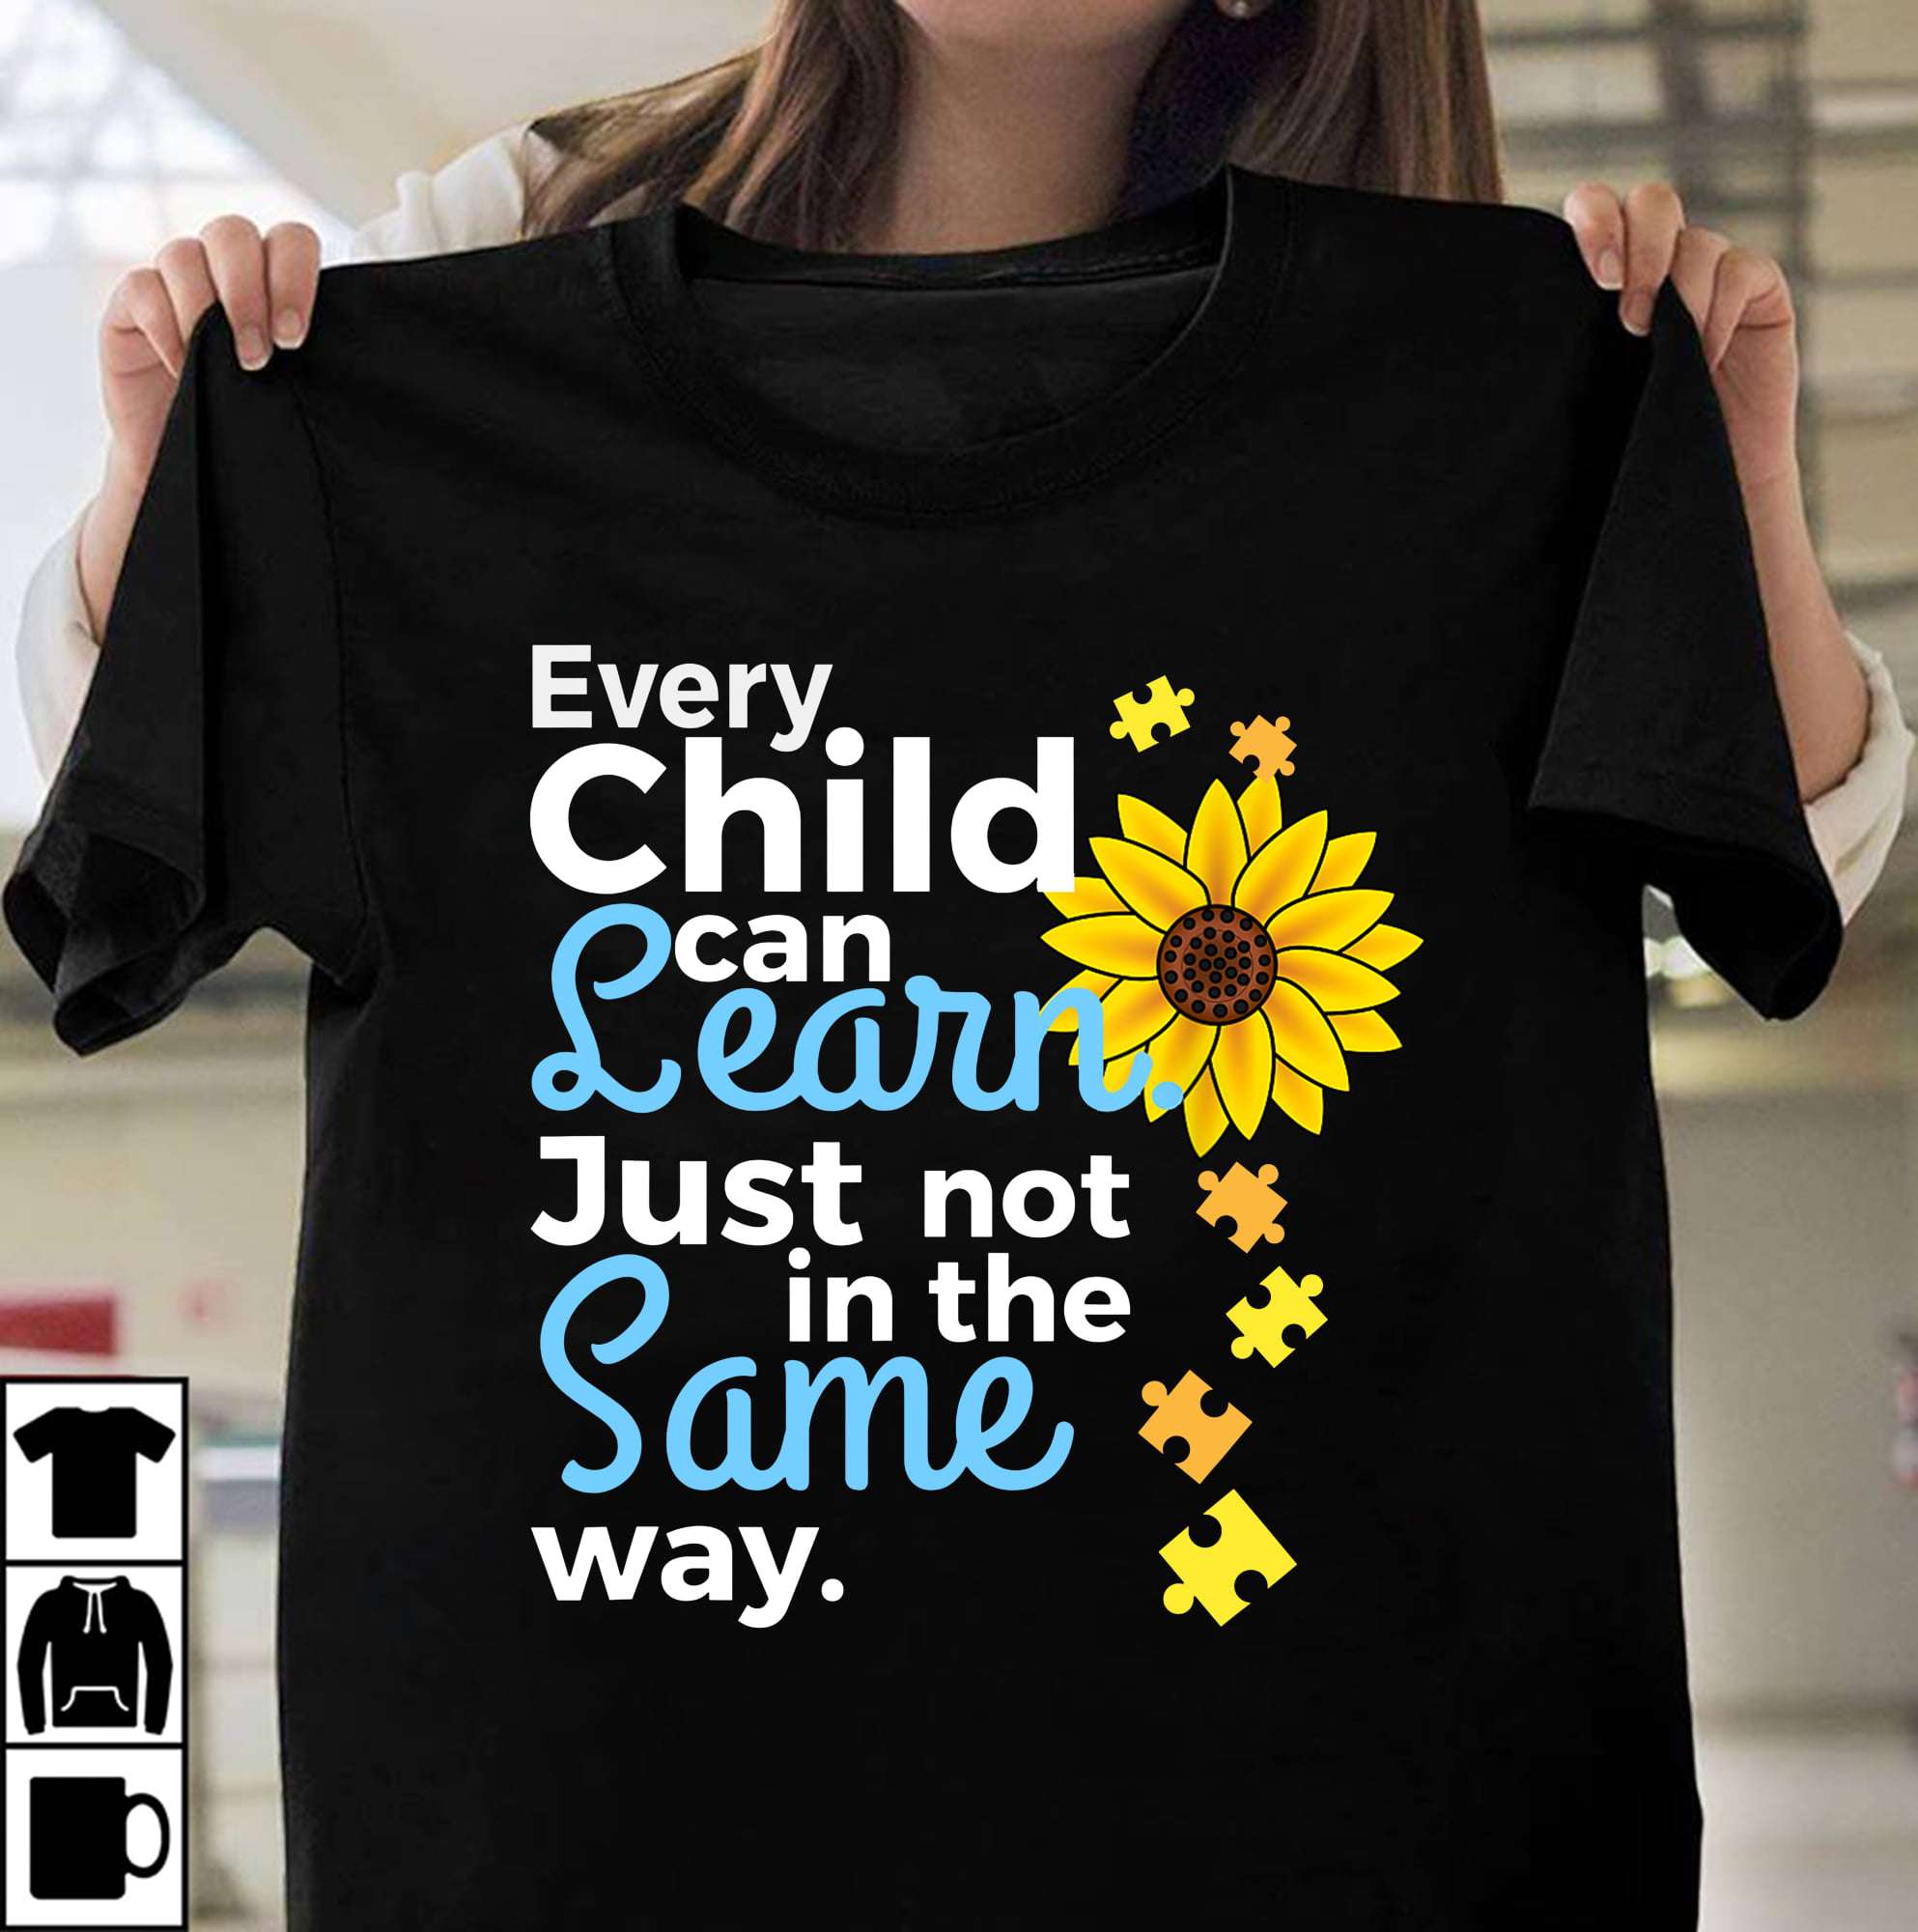 Every child can learn just not in the same way - Autism awareness, autism children